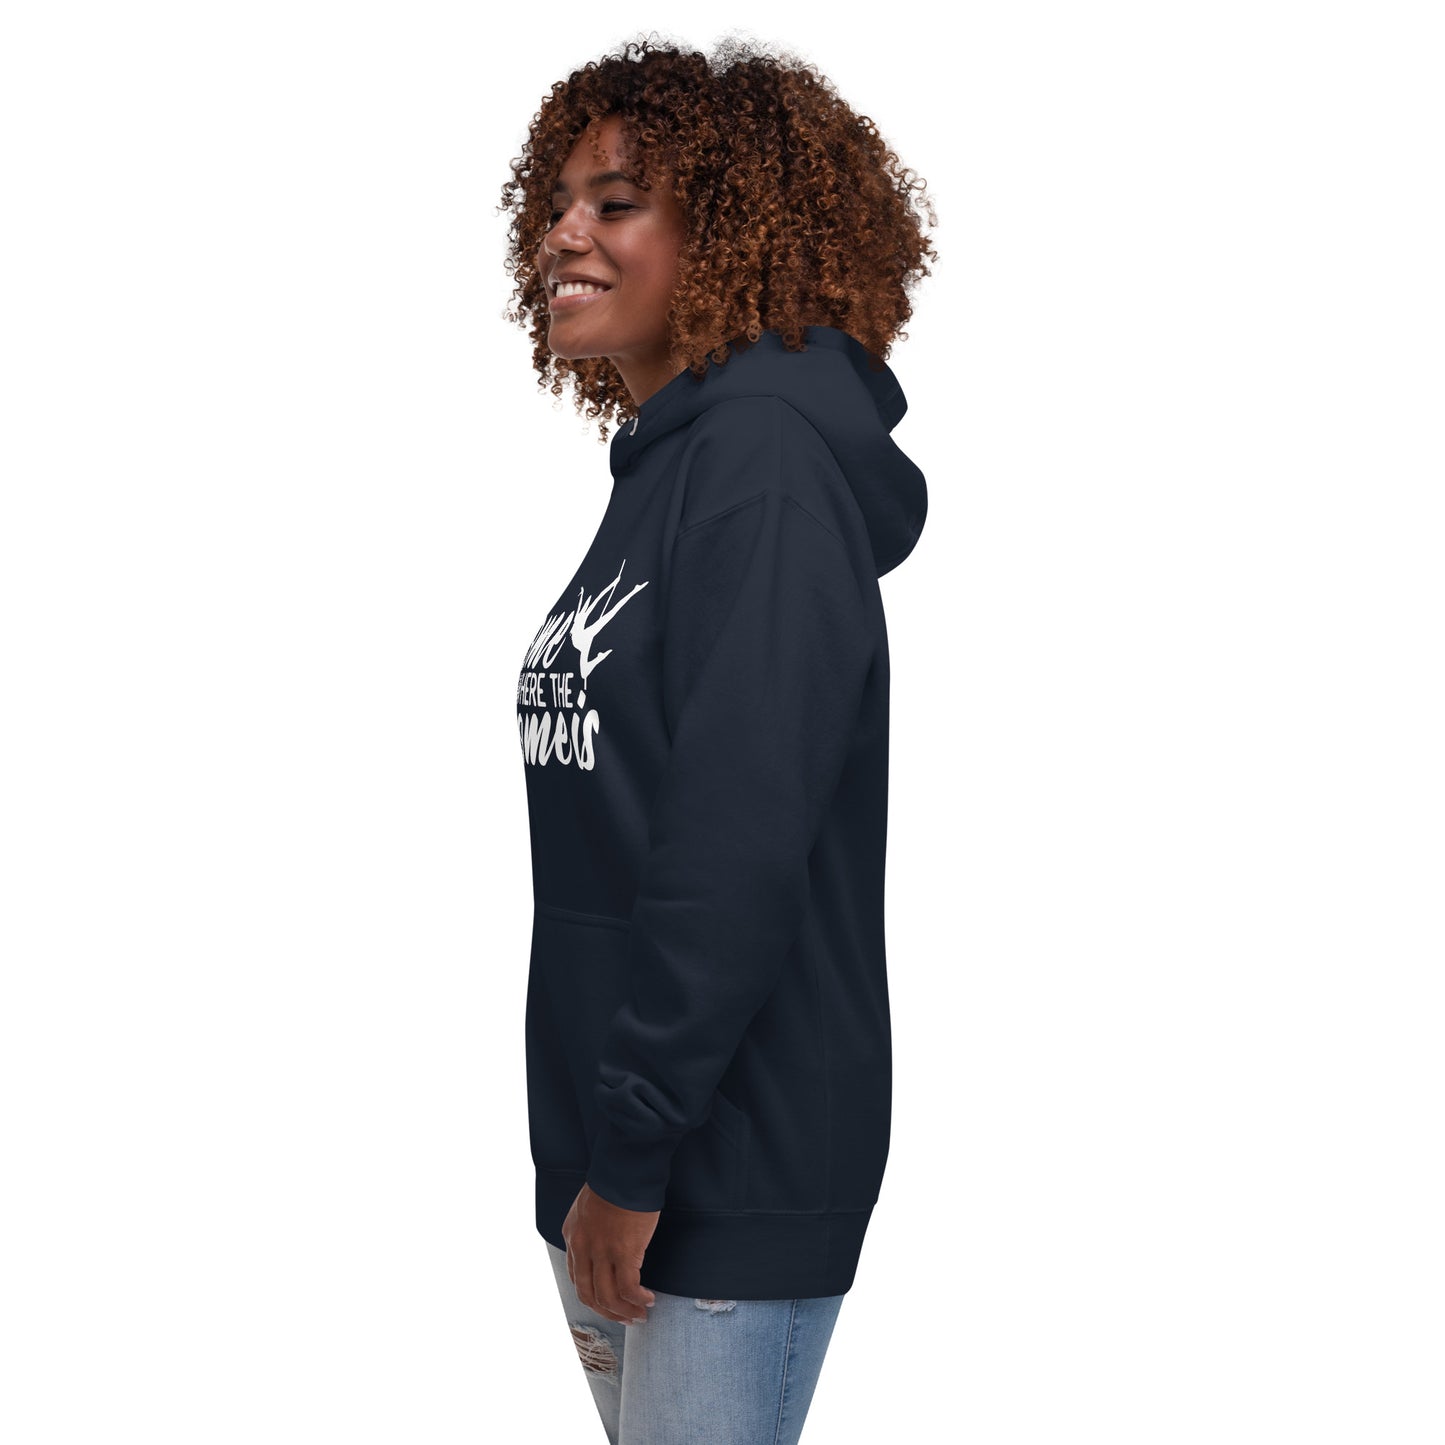 Home Is Where The Chrome Is - Unisex Hoodie